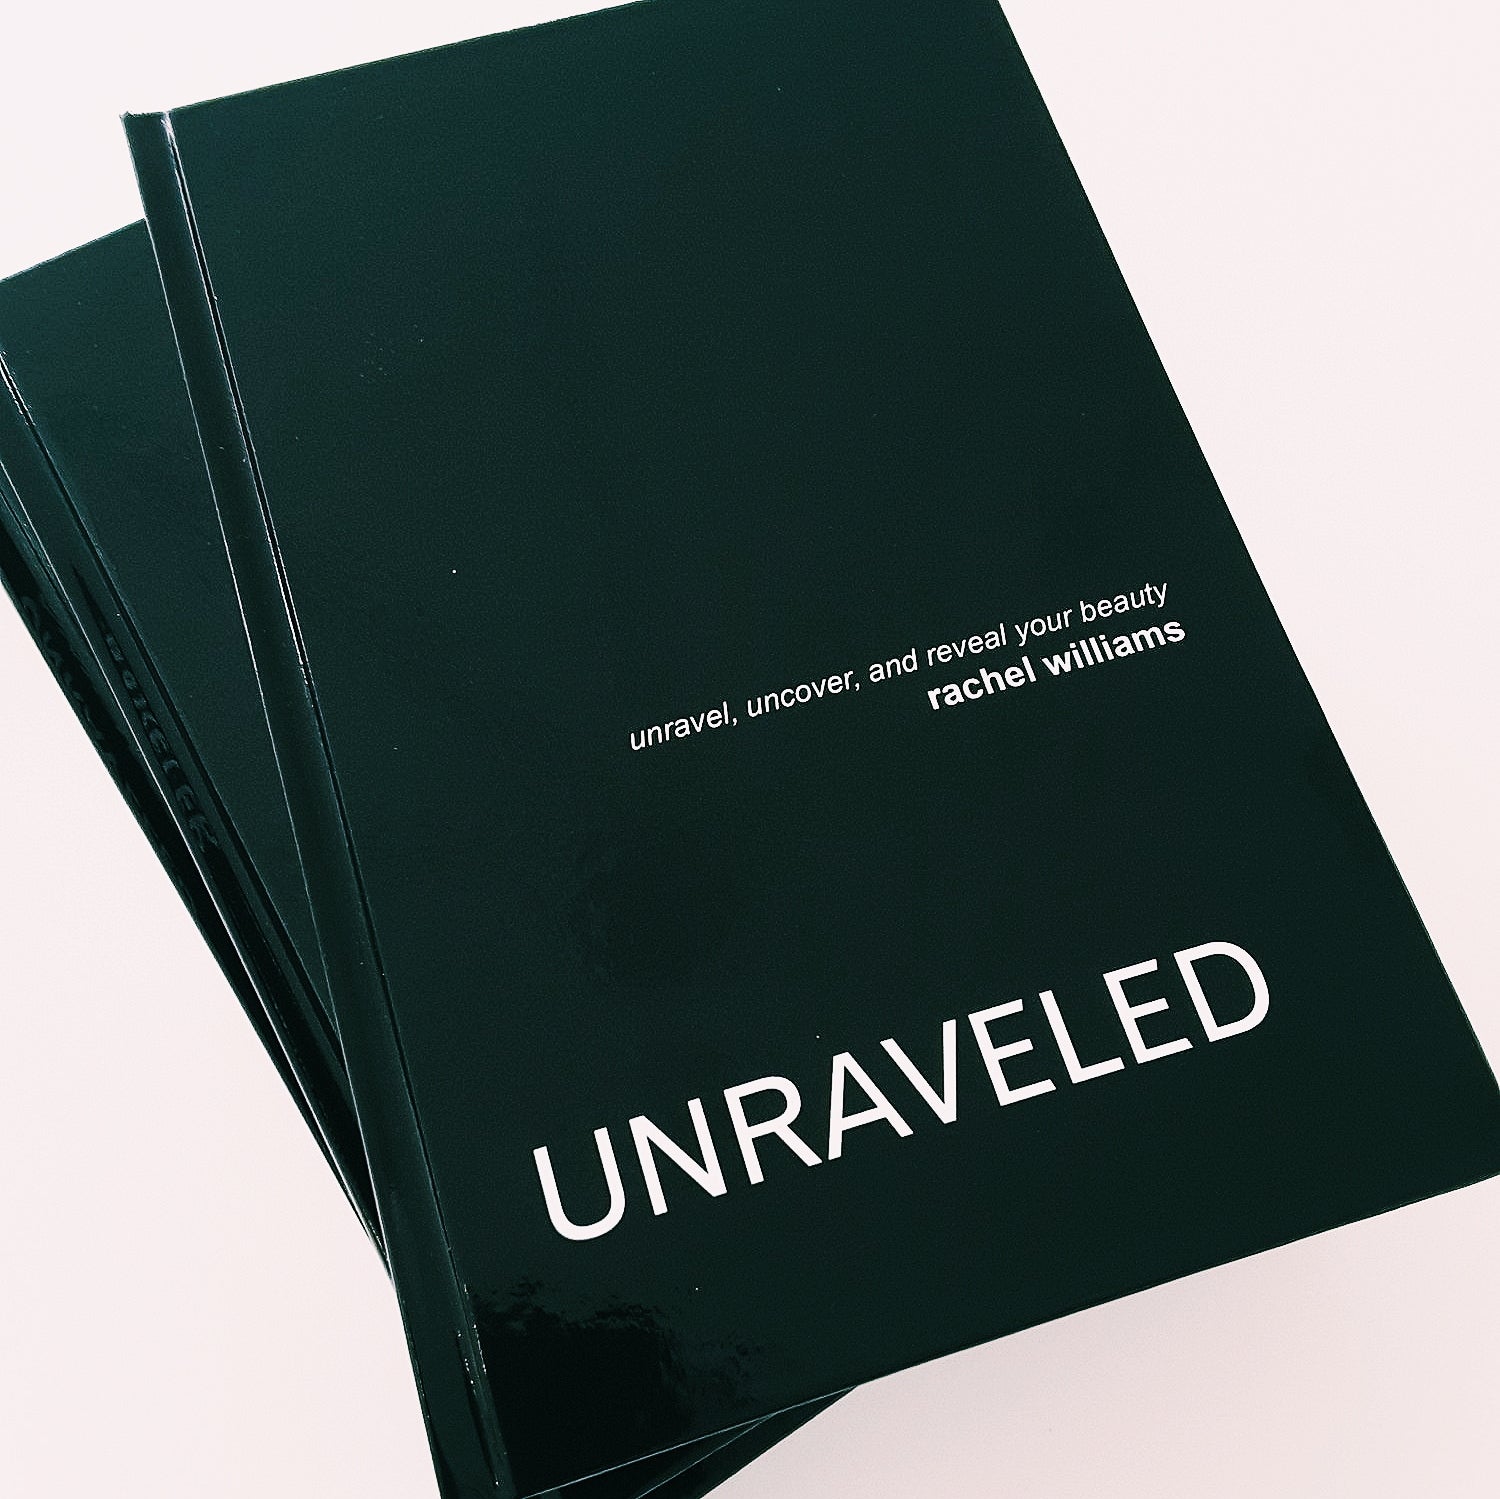 Unraveled: unravel, uncover, and reveal your beauty